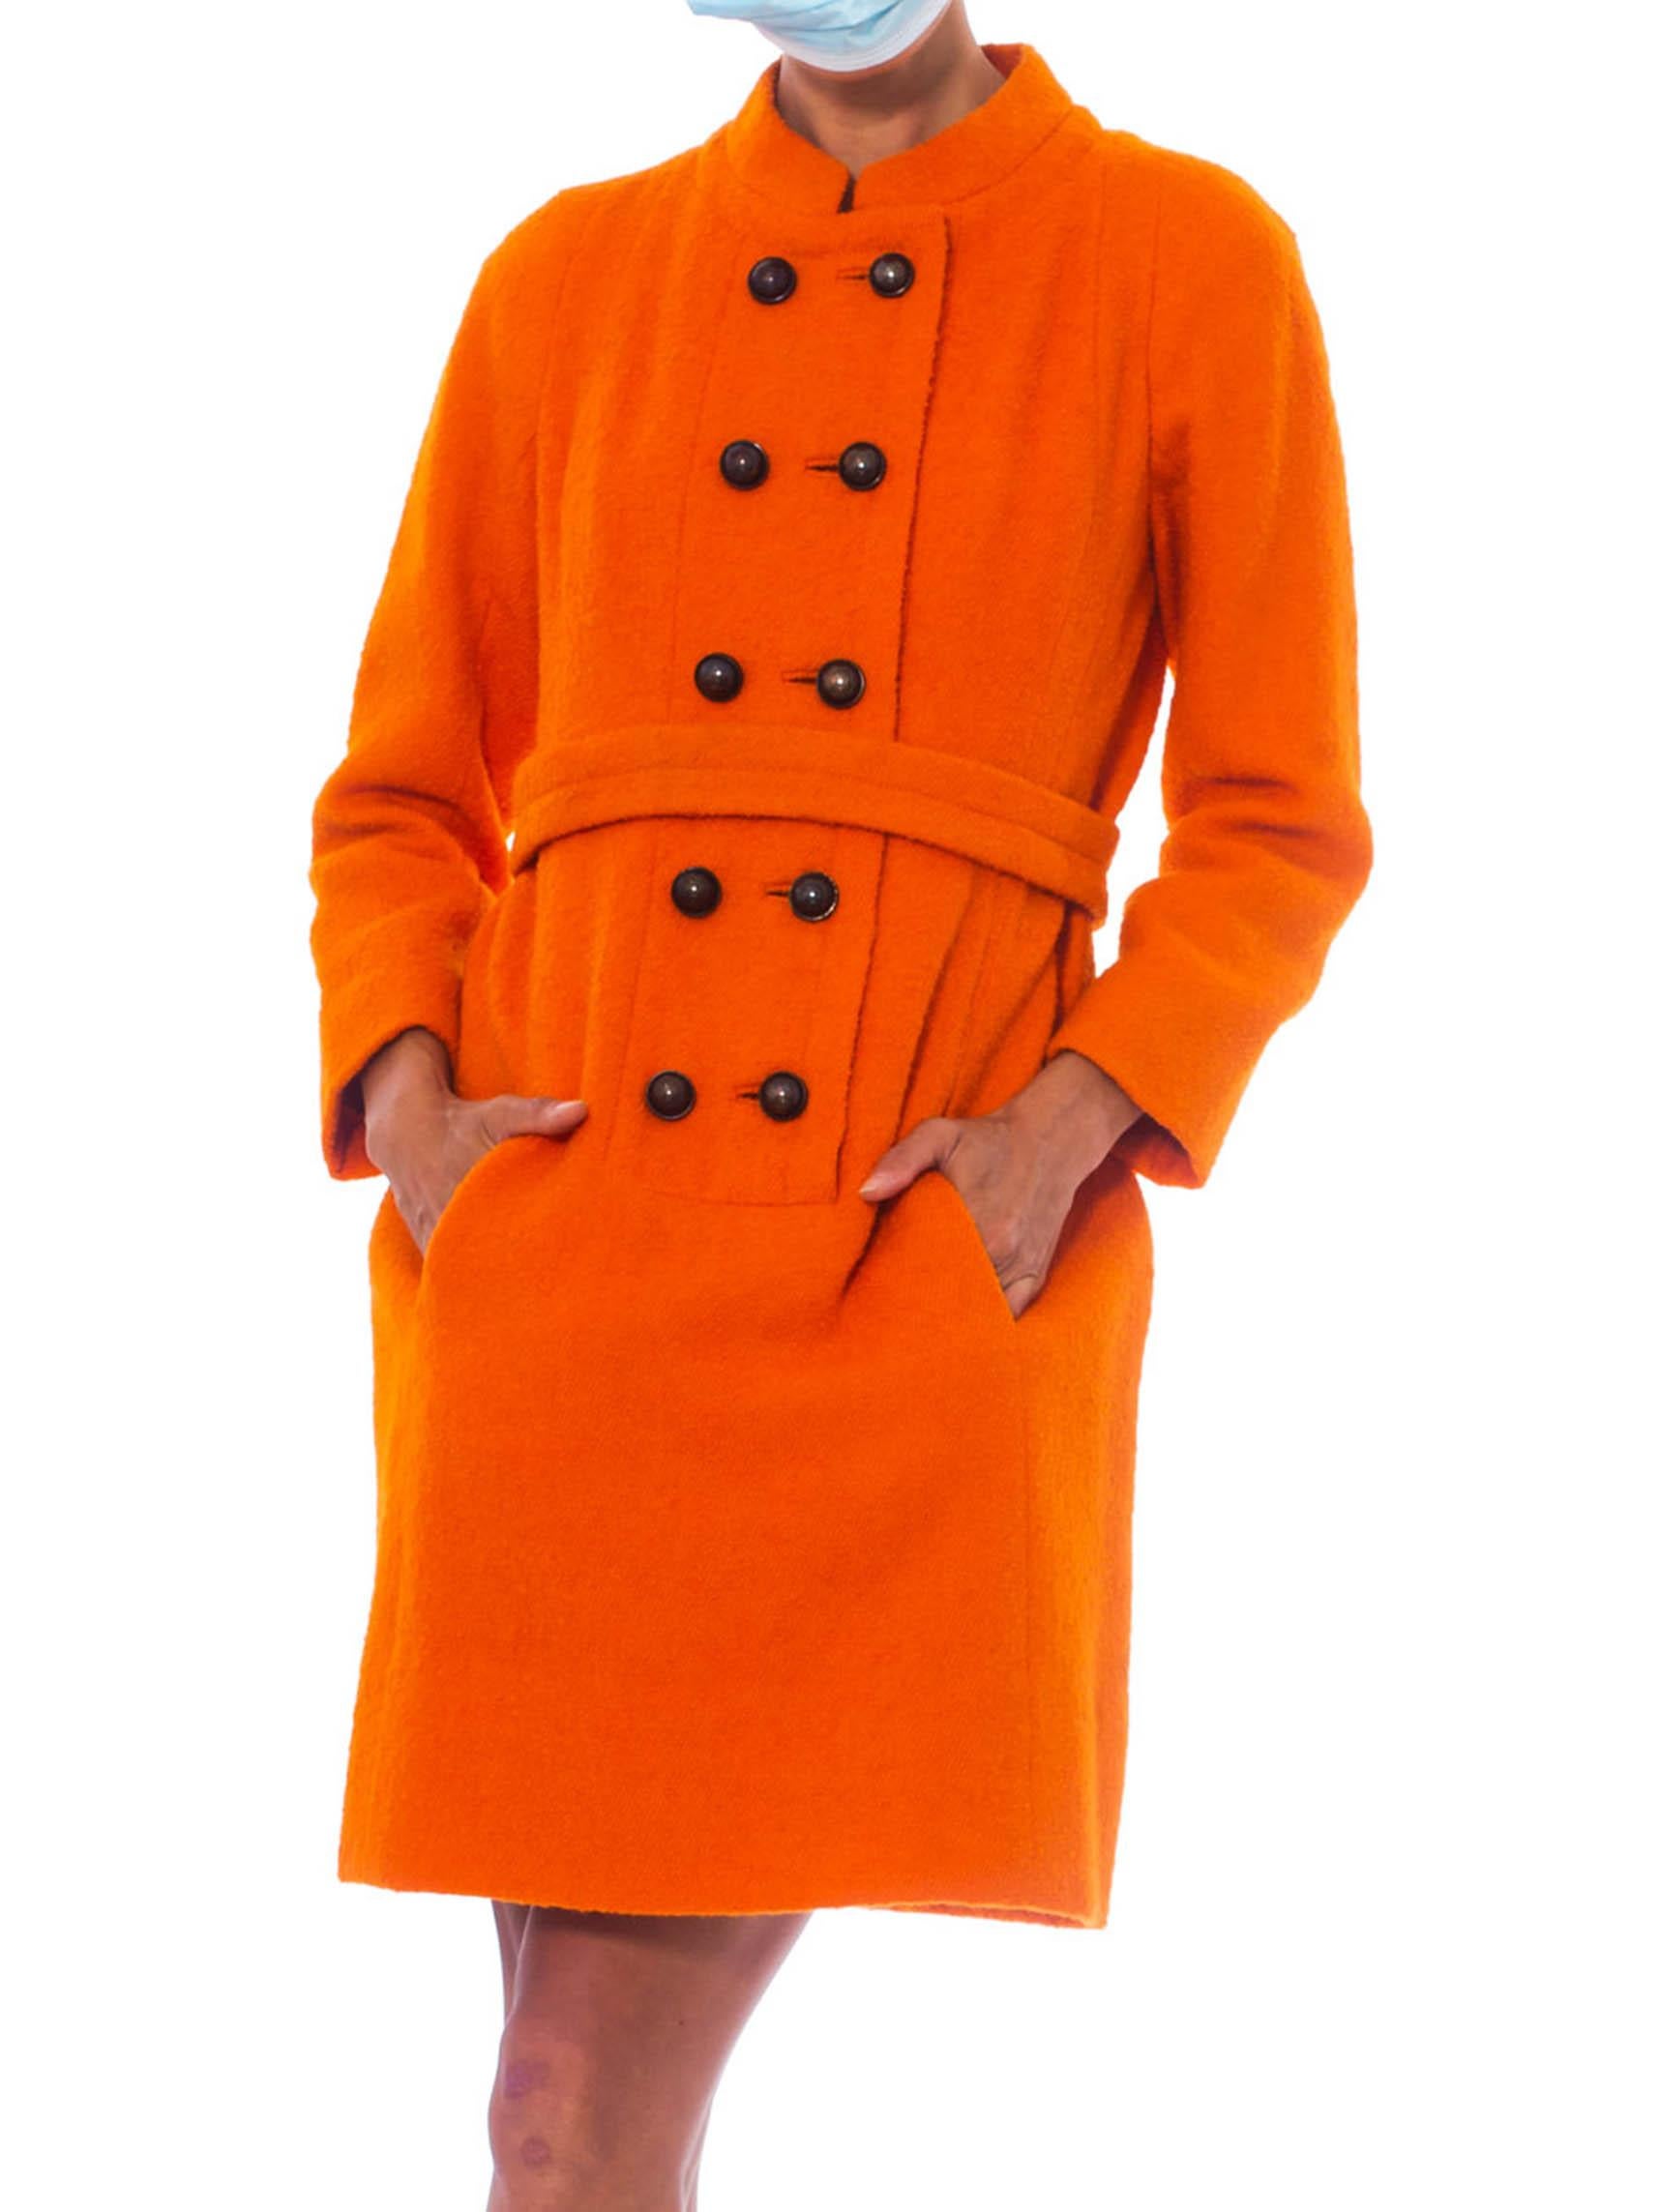 1960S GALANOS Orange Wool Boucle Mod Shift Dress Fully Lined In Silk With Pockets & Belt